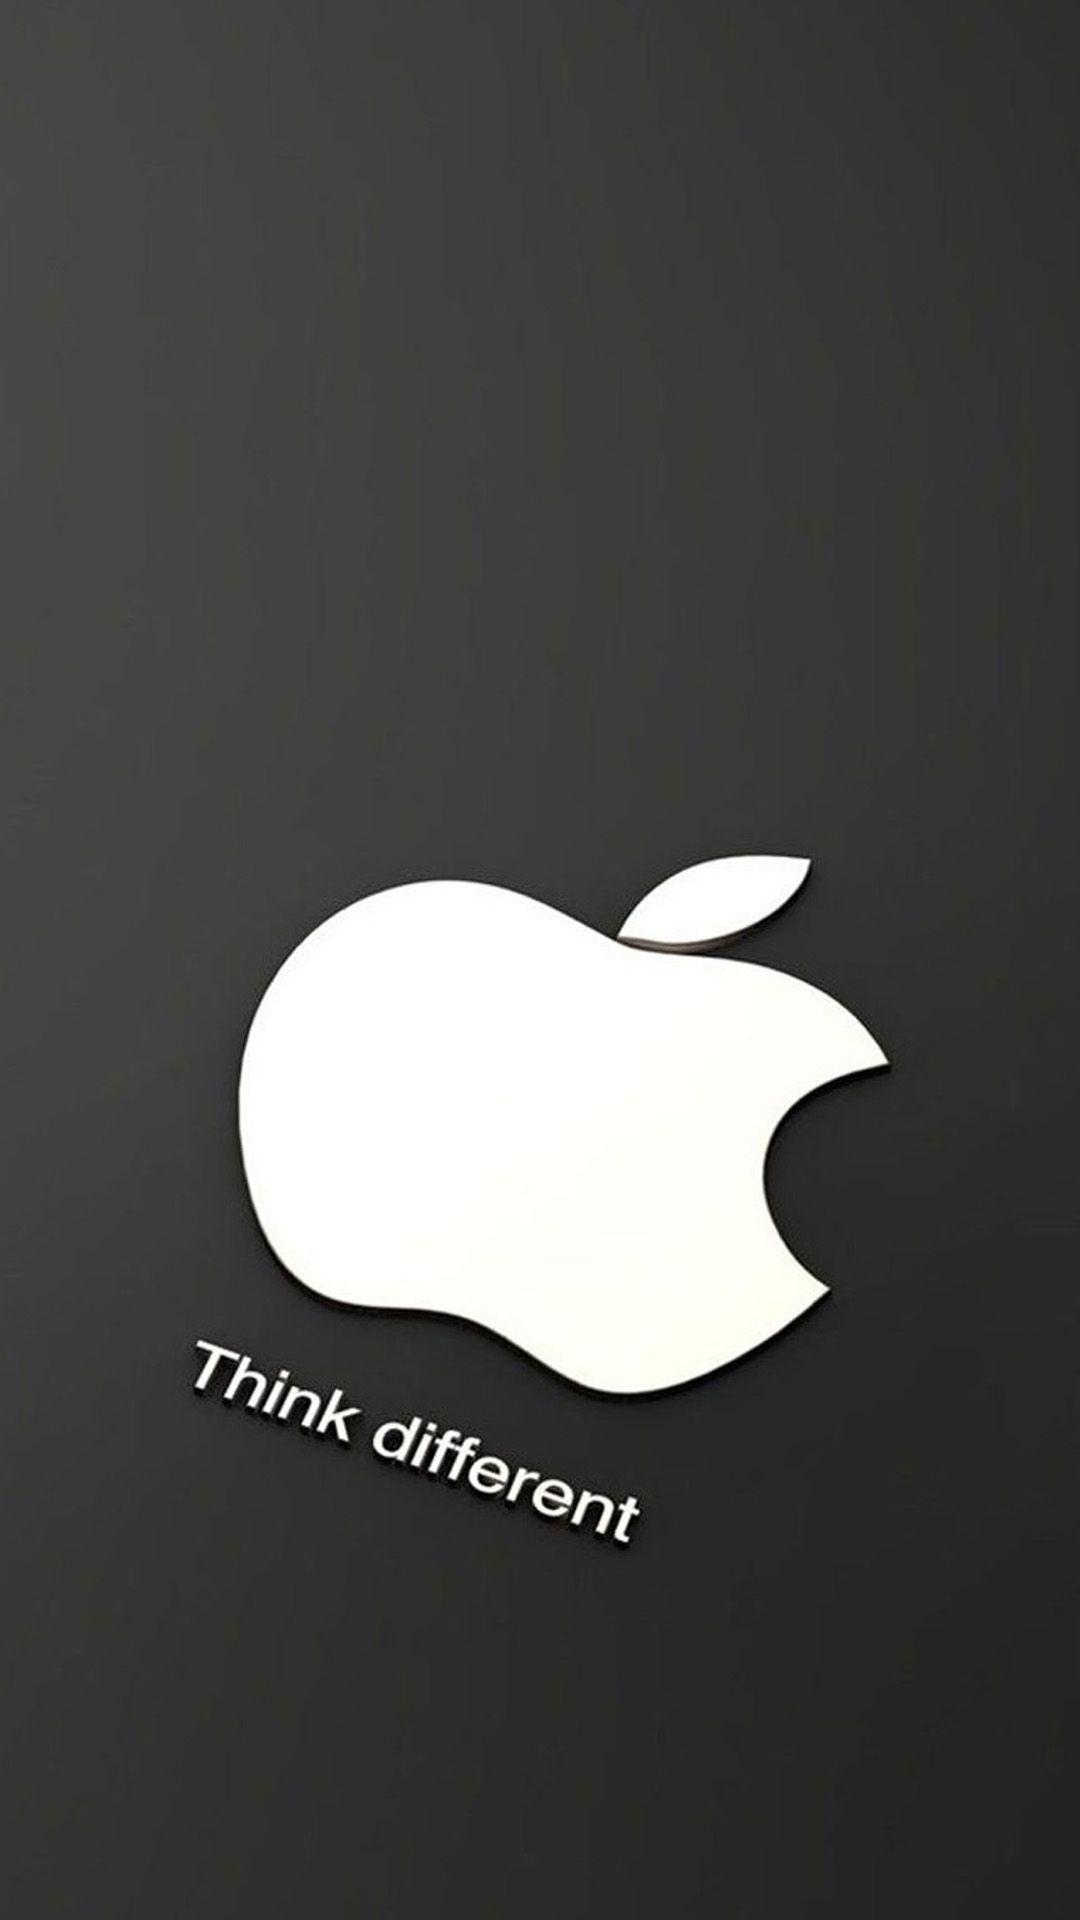 for apple download 459 грн.